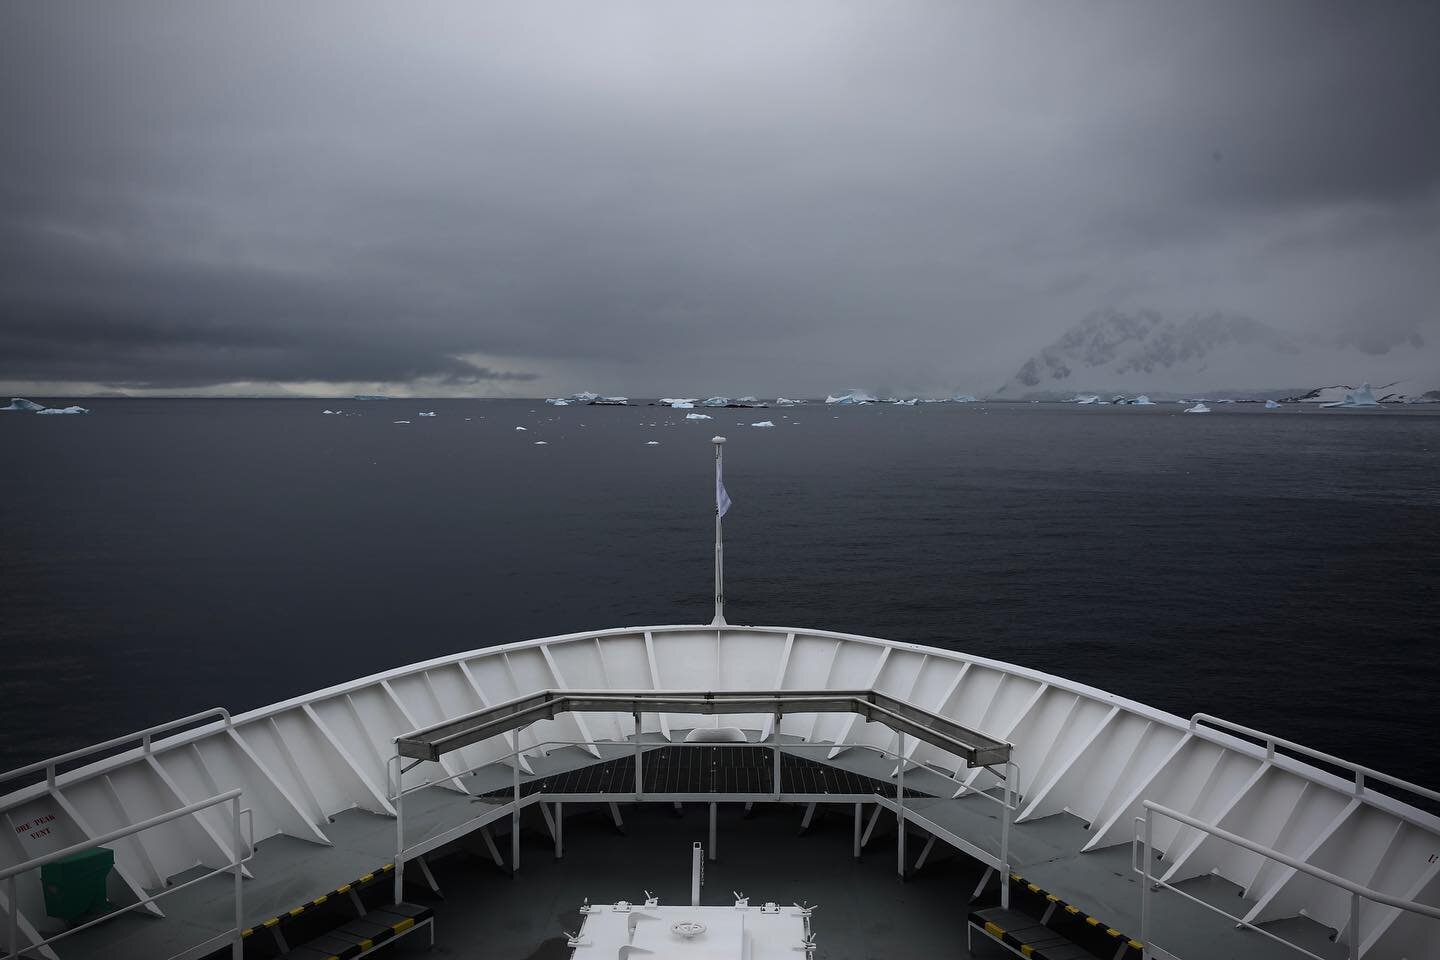 Next stop, Antarctica! I am so excited to be heading to Antarctica with @lindbladexp aboard the @natgeoexpeditions Endurance ship where we&rsquo;ll be presenting @afterantarctica - and @goodmorningamerica will be broadcasting live from the journey! T